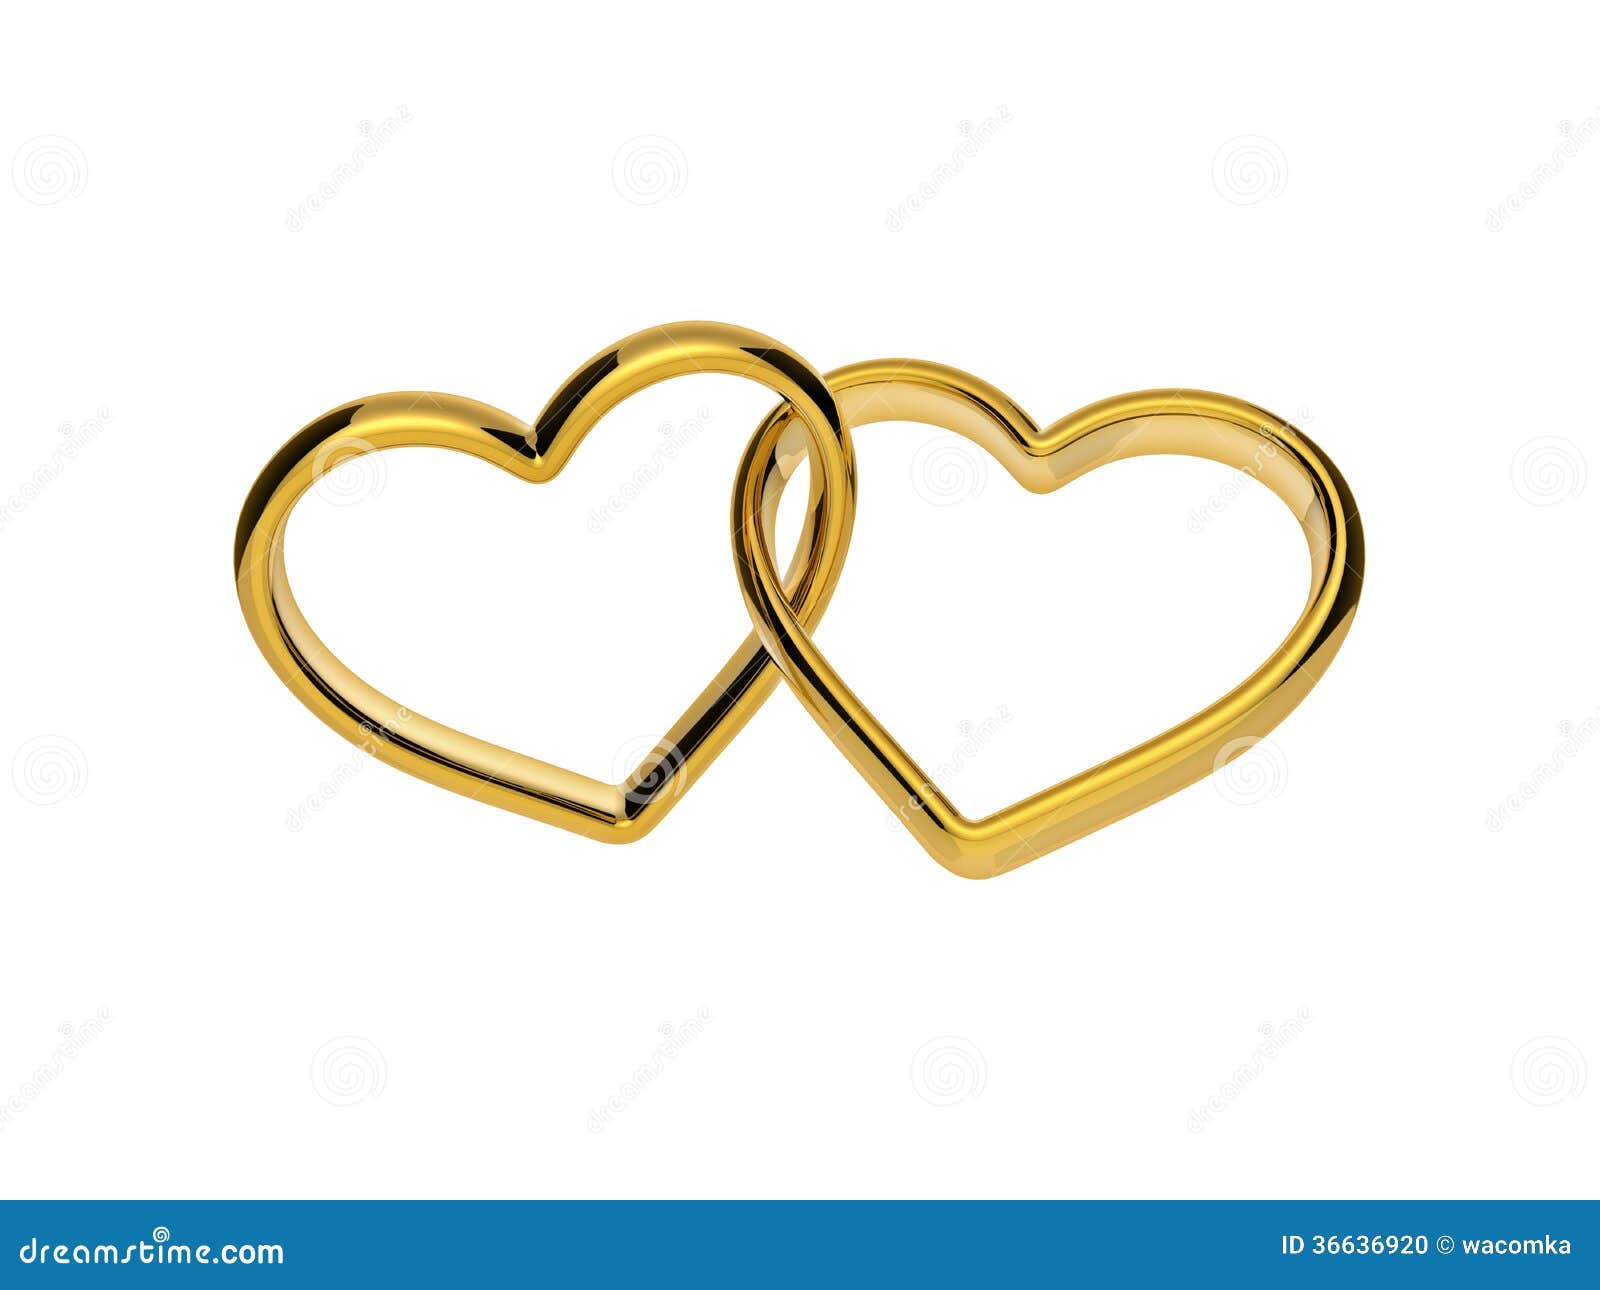 clipart on marriage - photo #25